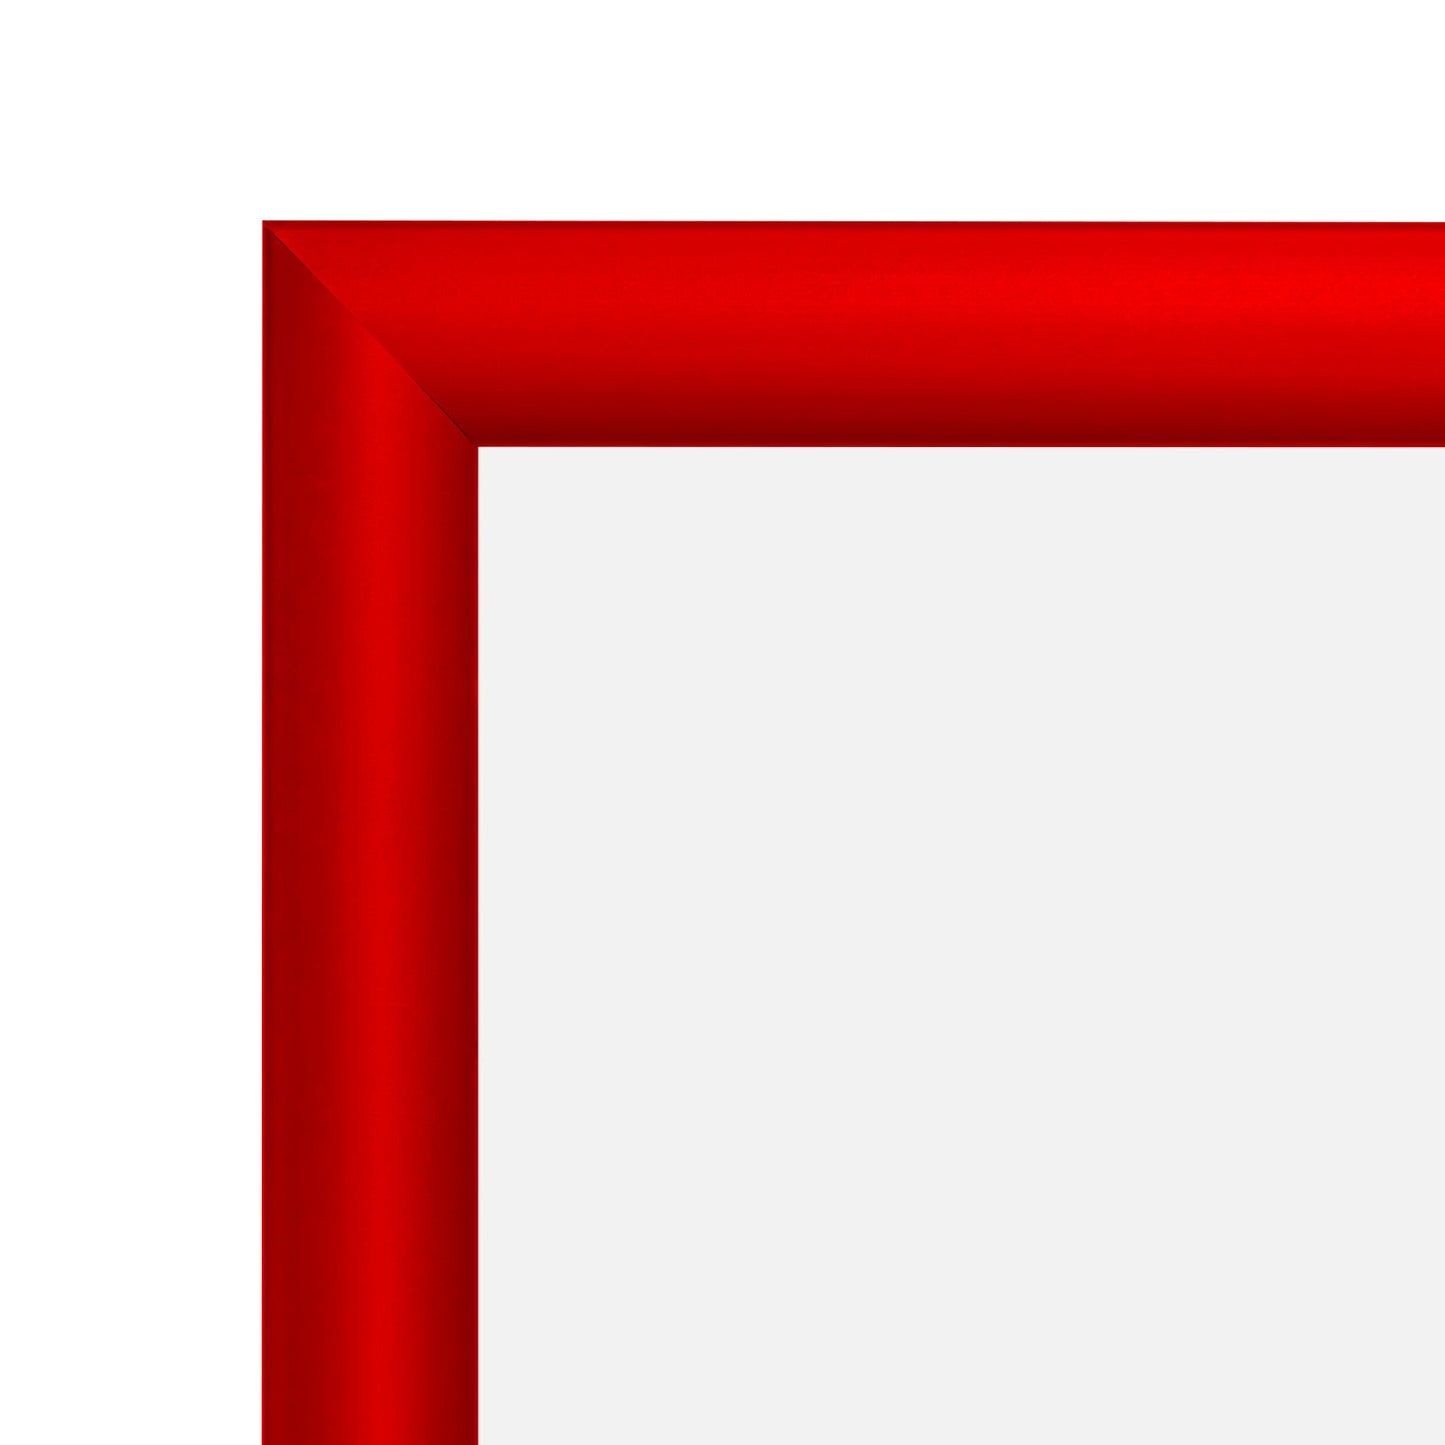 27x40 Red SnapeZo® Snap Frame - 1.2" Profile